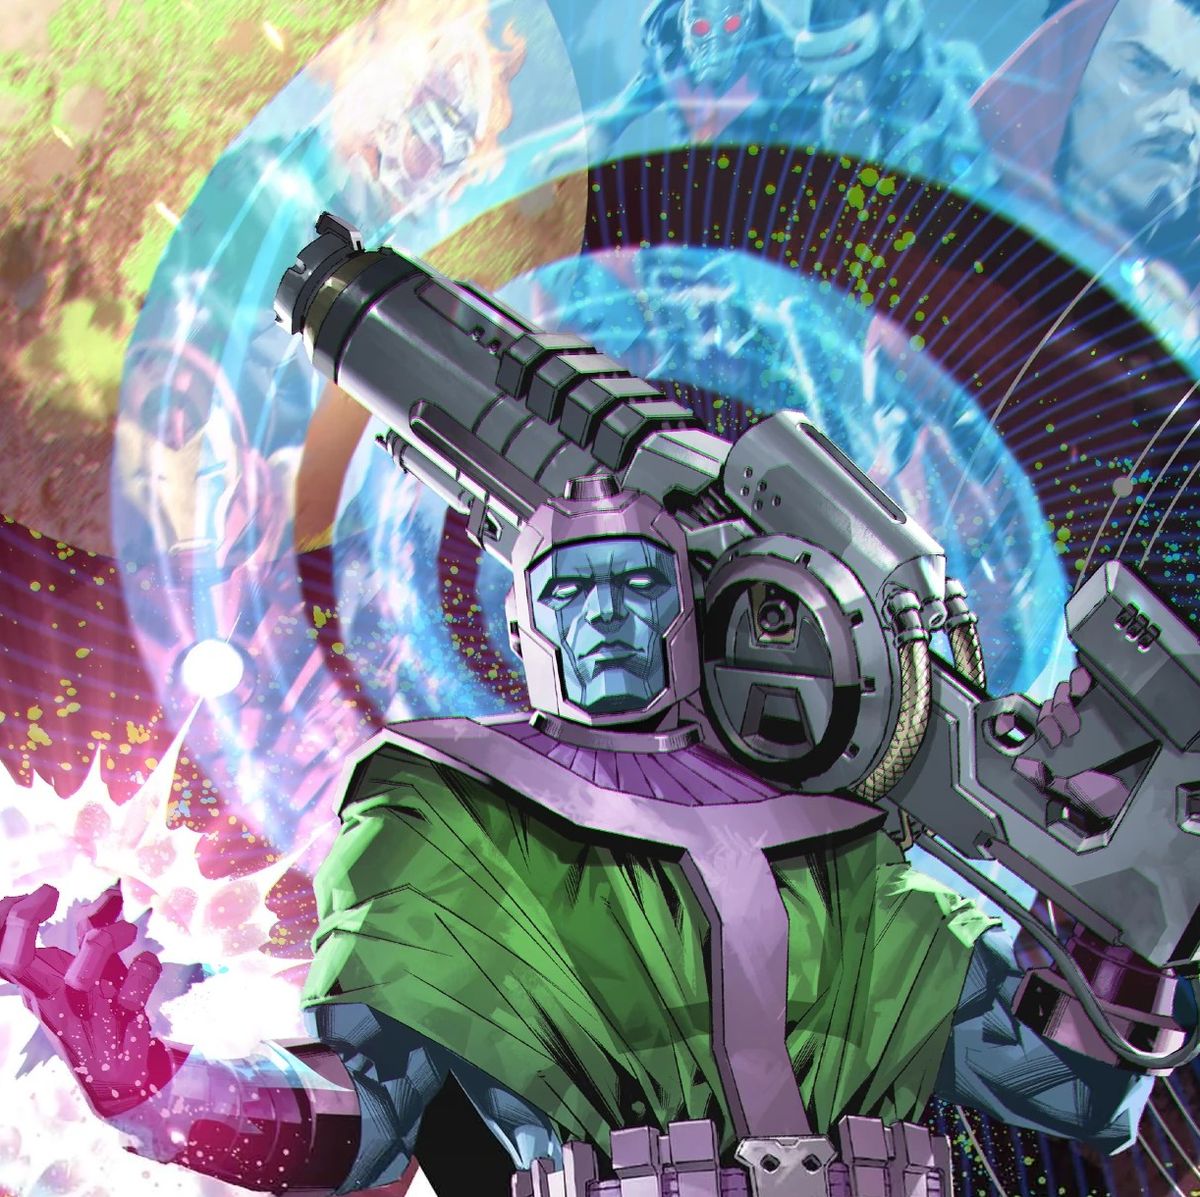 Avengers 5: Kang Dynasty Receives Exciting Script Update